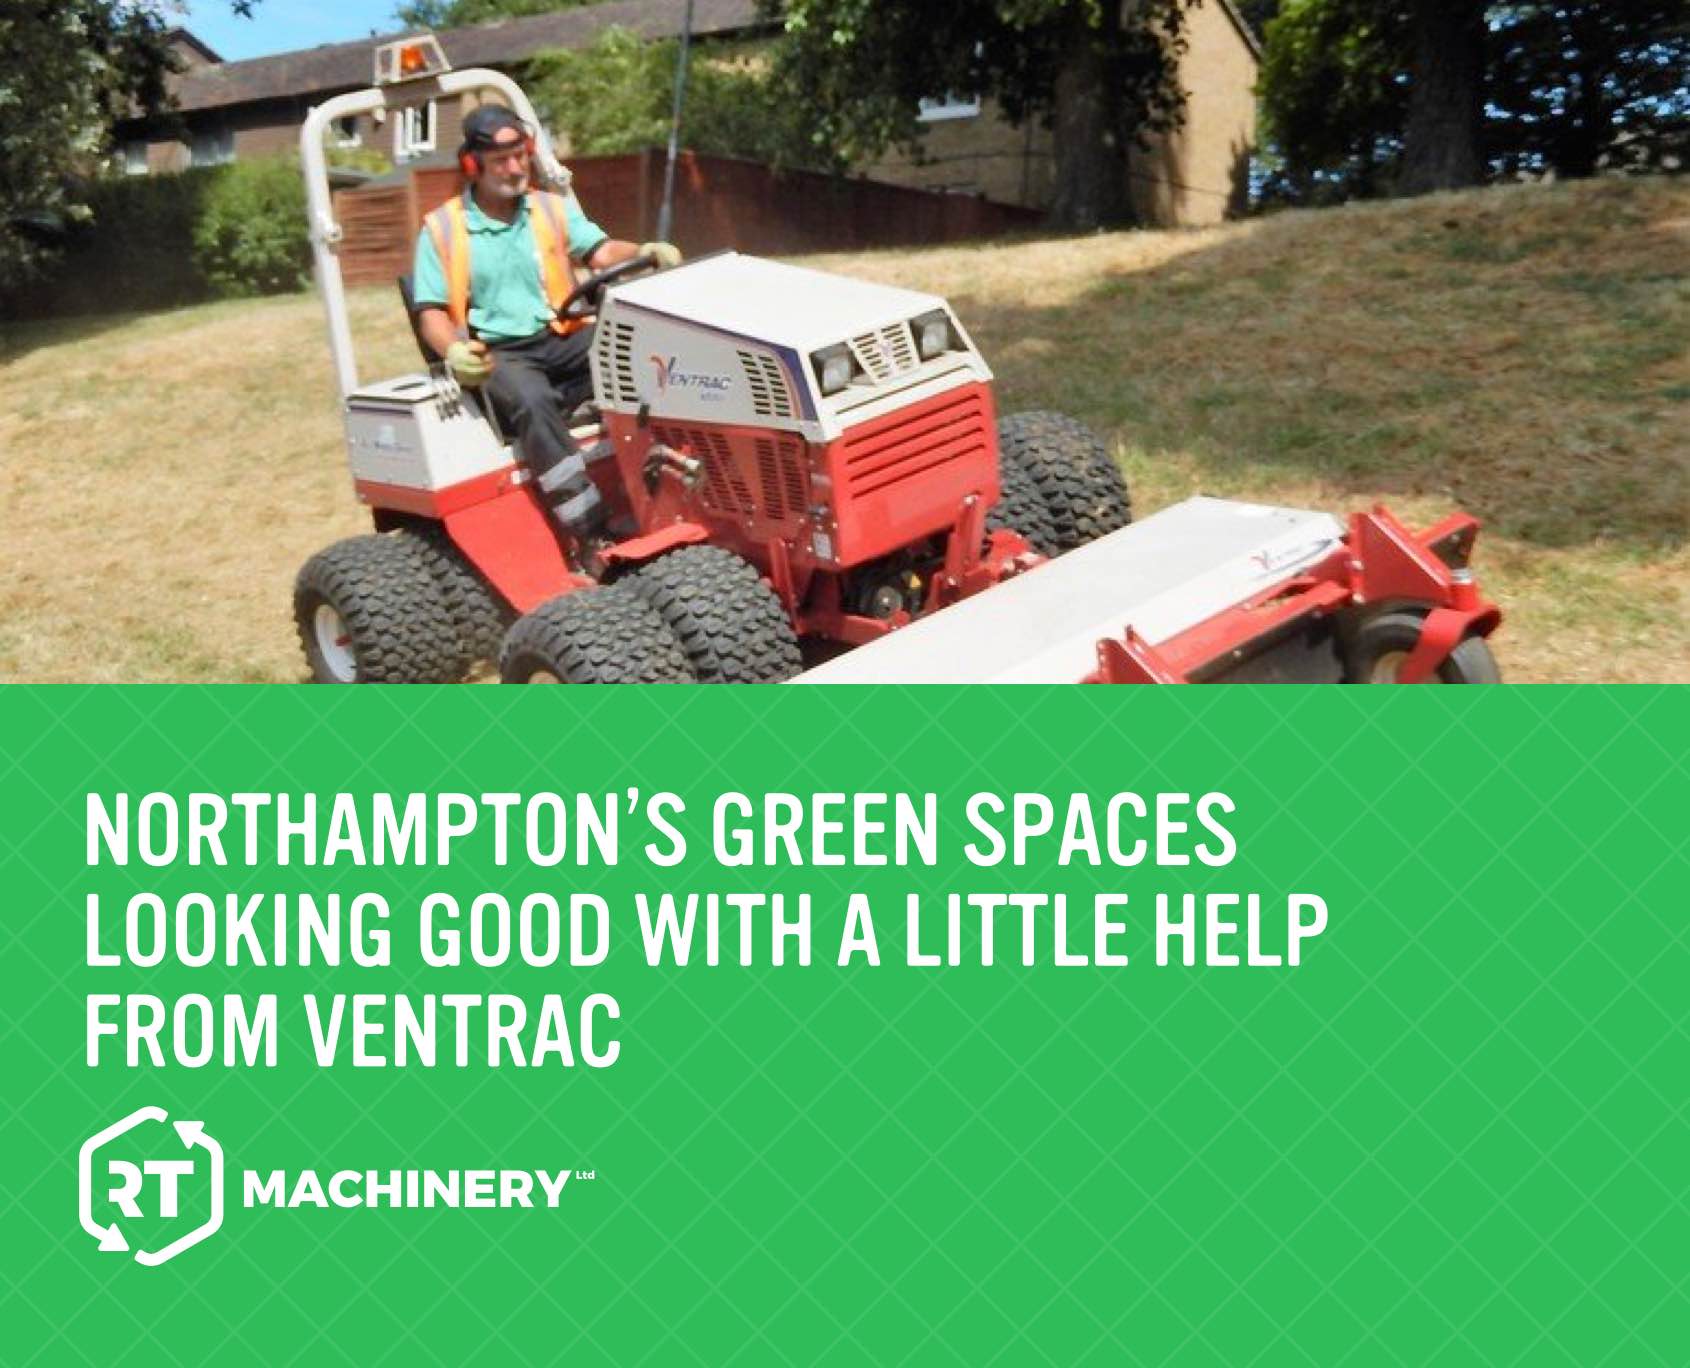 Northampton’s Green Spaces Looking Good with a Little Help From Ventrac